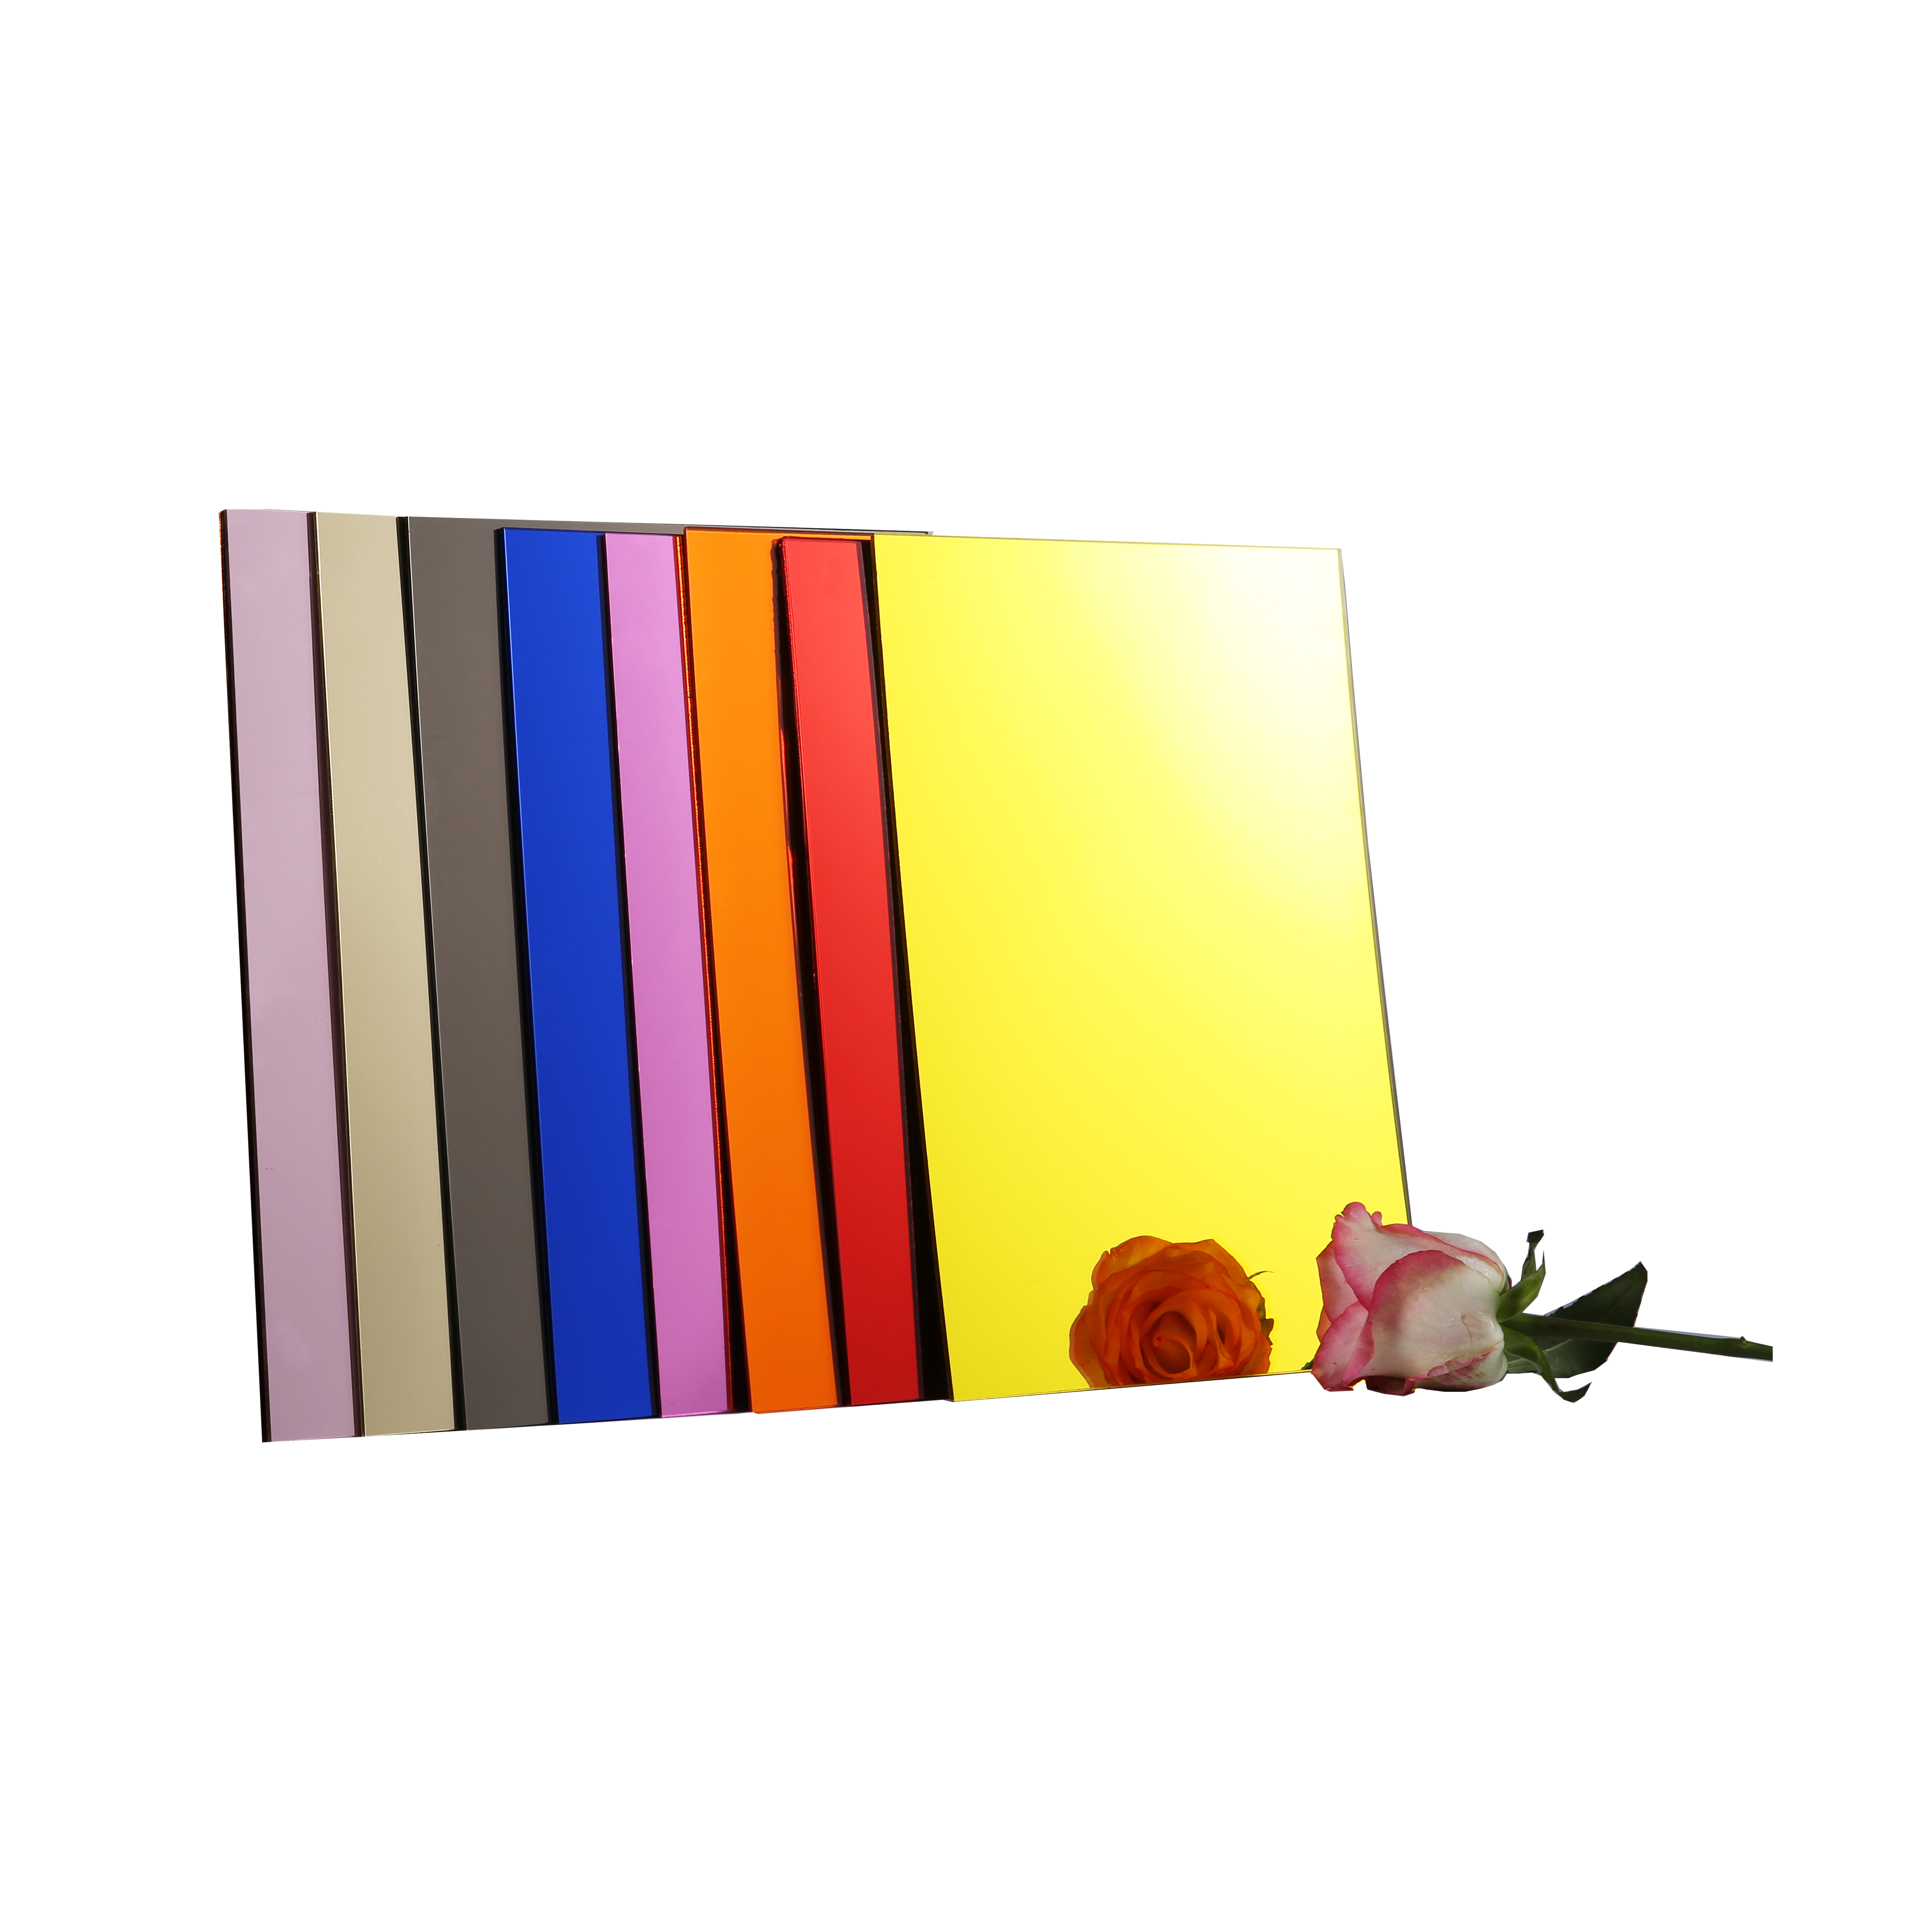 Moulded Acrylic Designer Mirror 1mm Thick Acrylic Mirror Mirrored Acrylic Wall Art